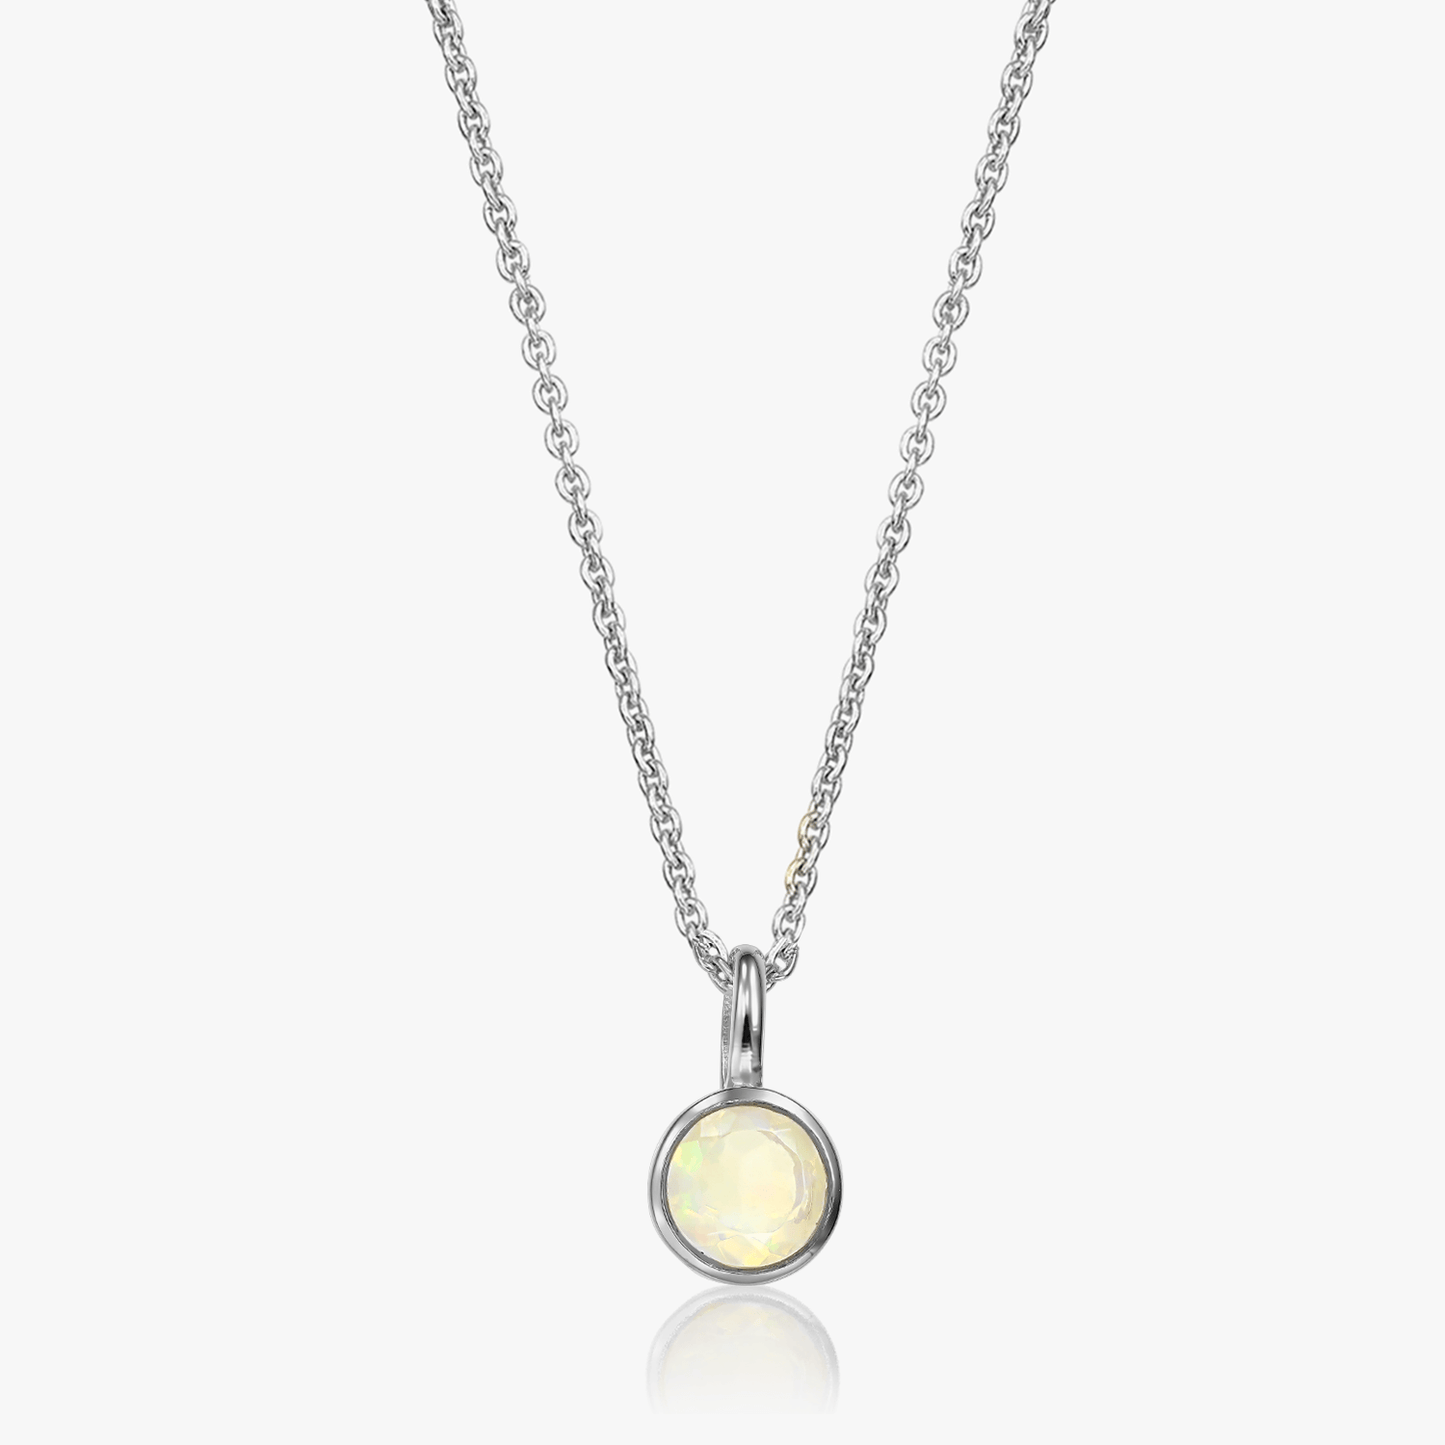 Silver necklace Birthstone October - Opal